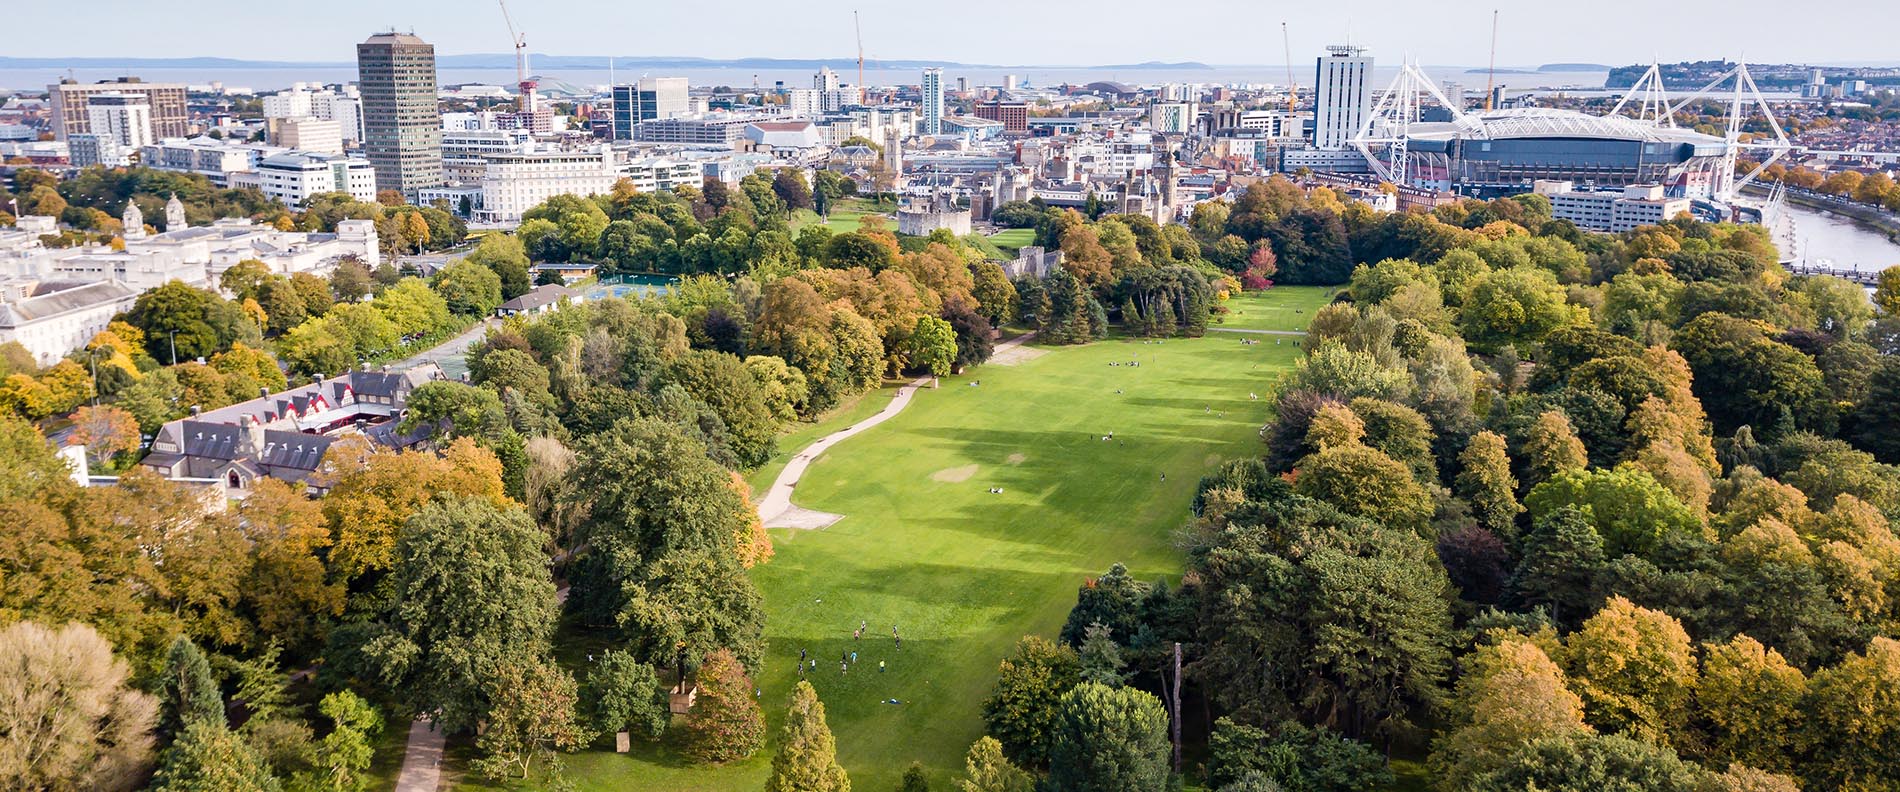 Bute park from the air